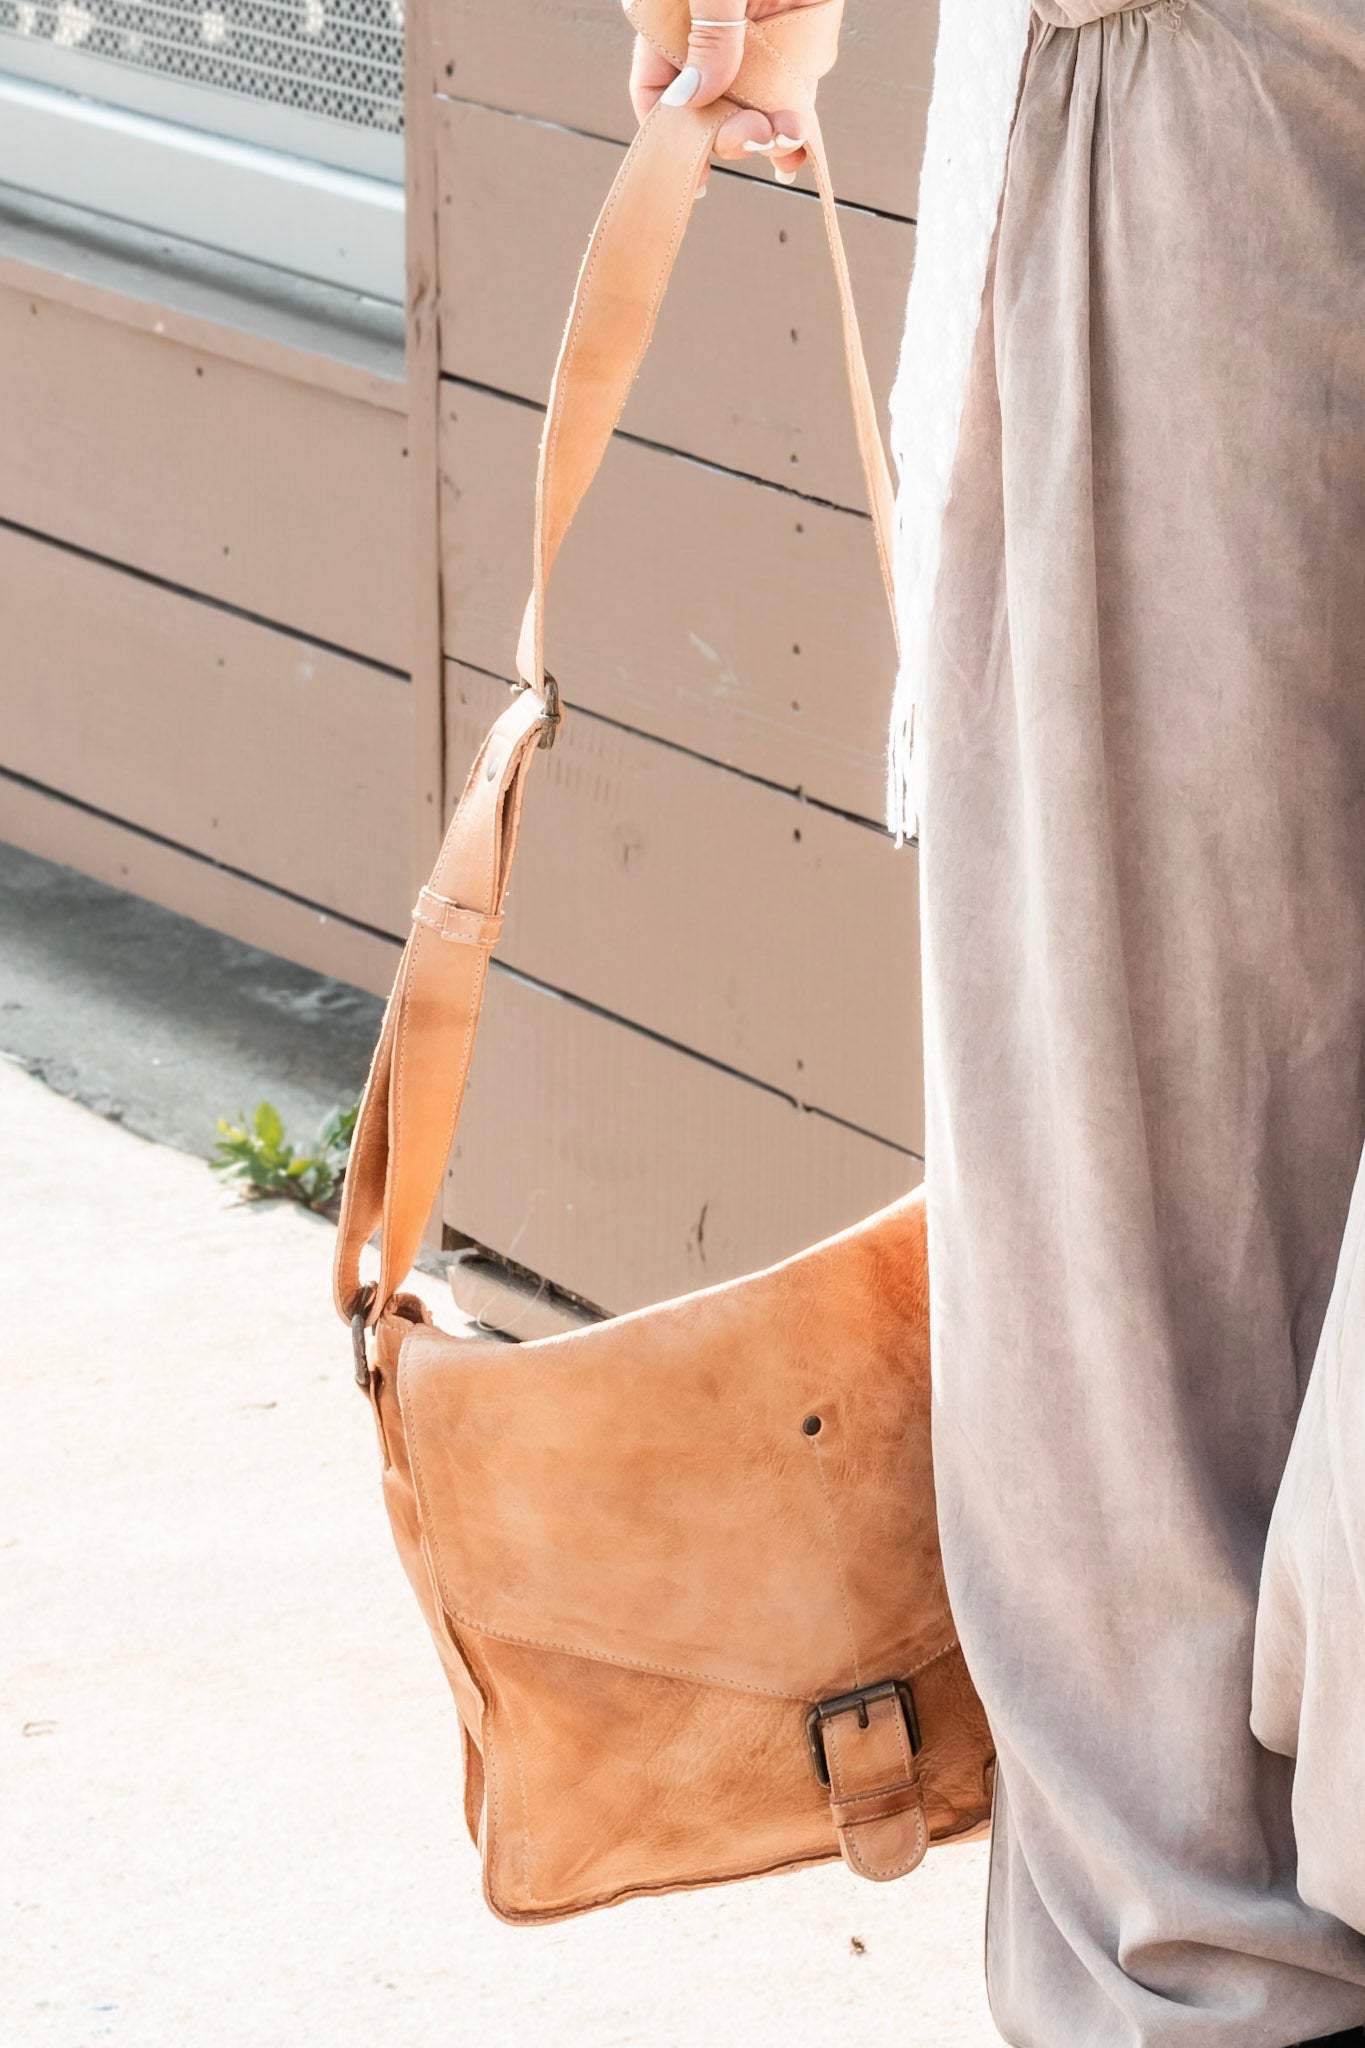 Load image into Gallery viewer, Venice Beach Crossbody in Tan Rustic - SpiritedBoutiques Boho Hippie Boutique Style Hand Bag, Bed Stu
